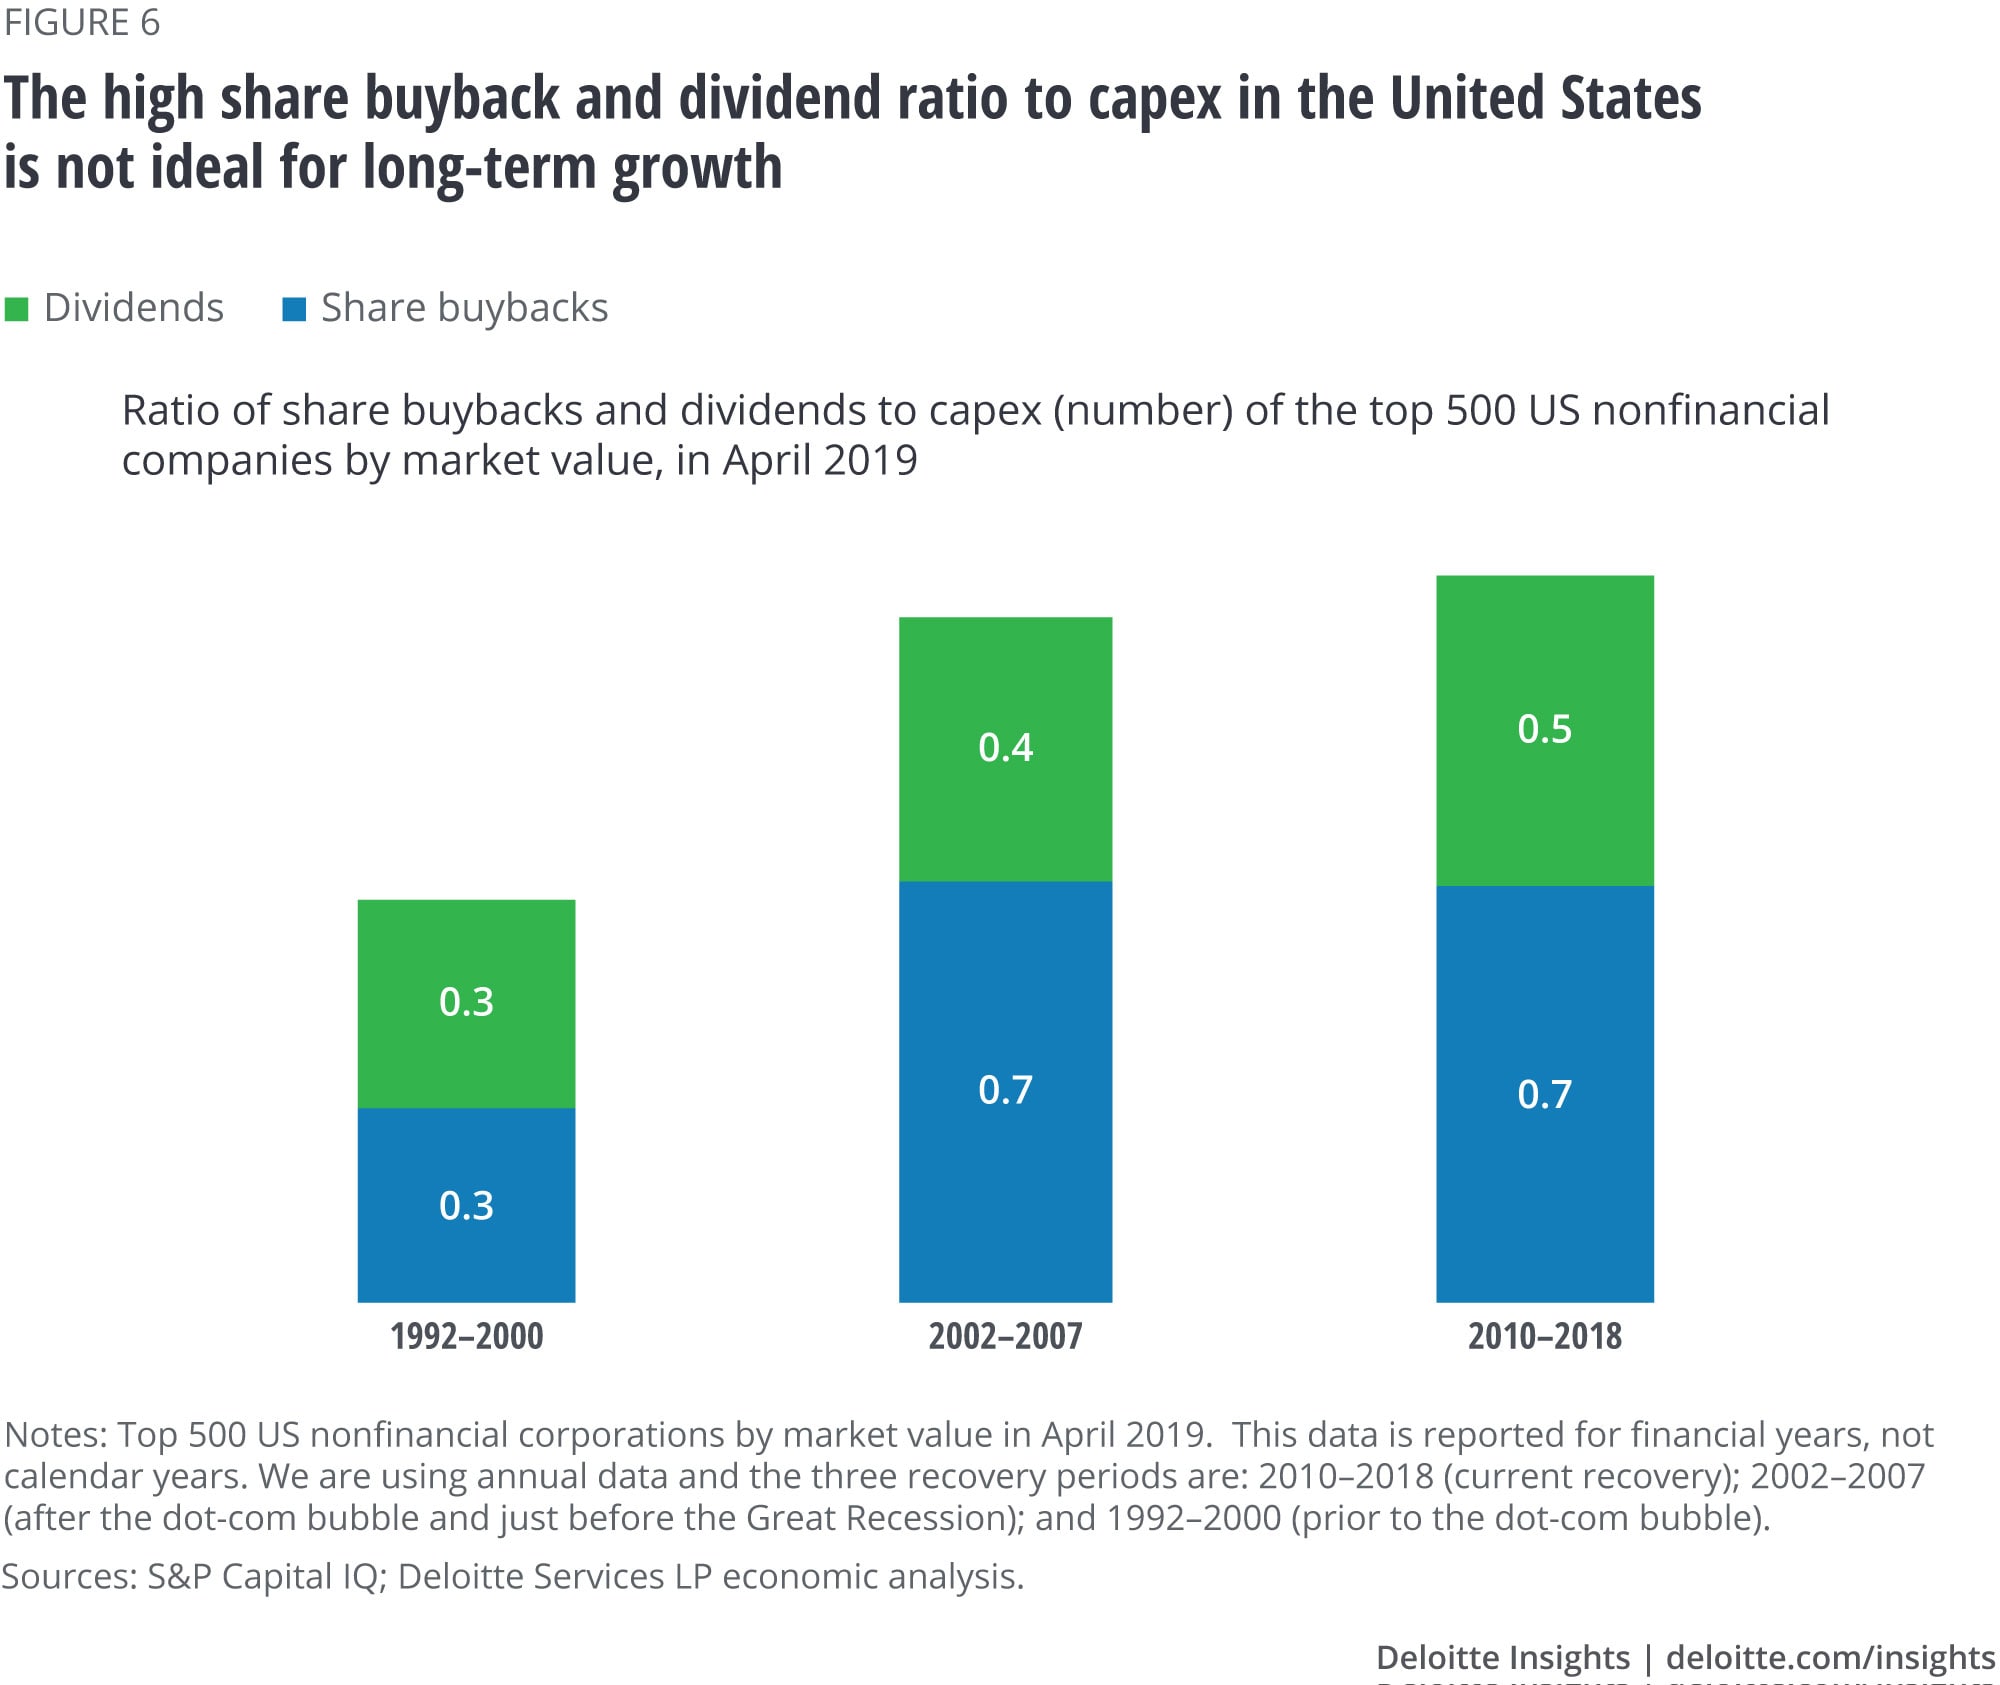 The high share buyback and dividend ratio to capex in the United States is not ideal for long-term growth